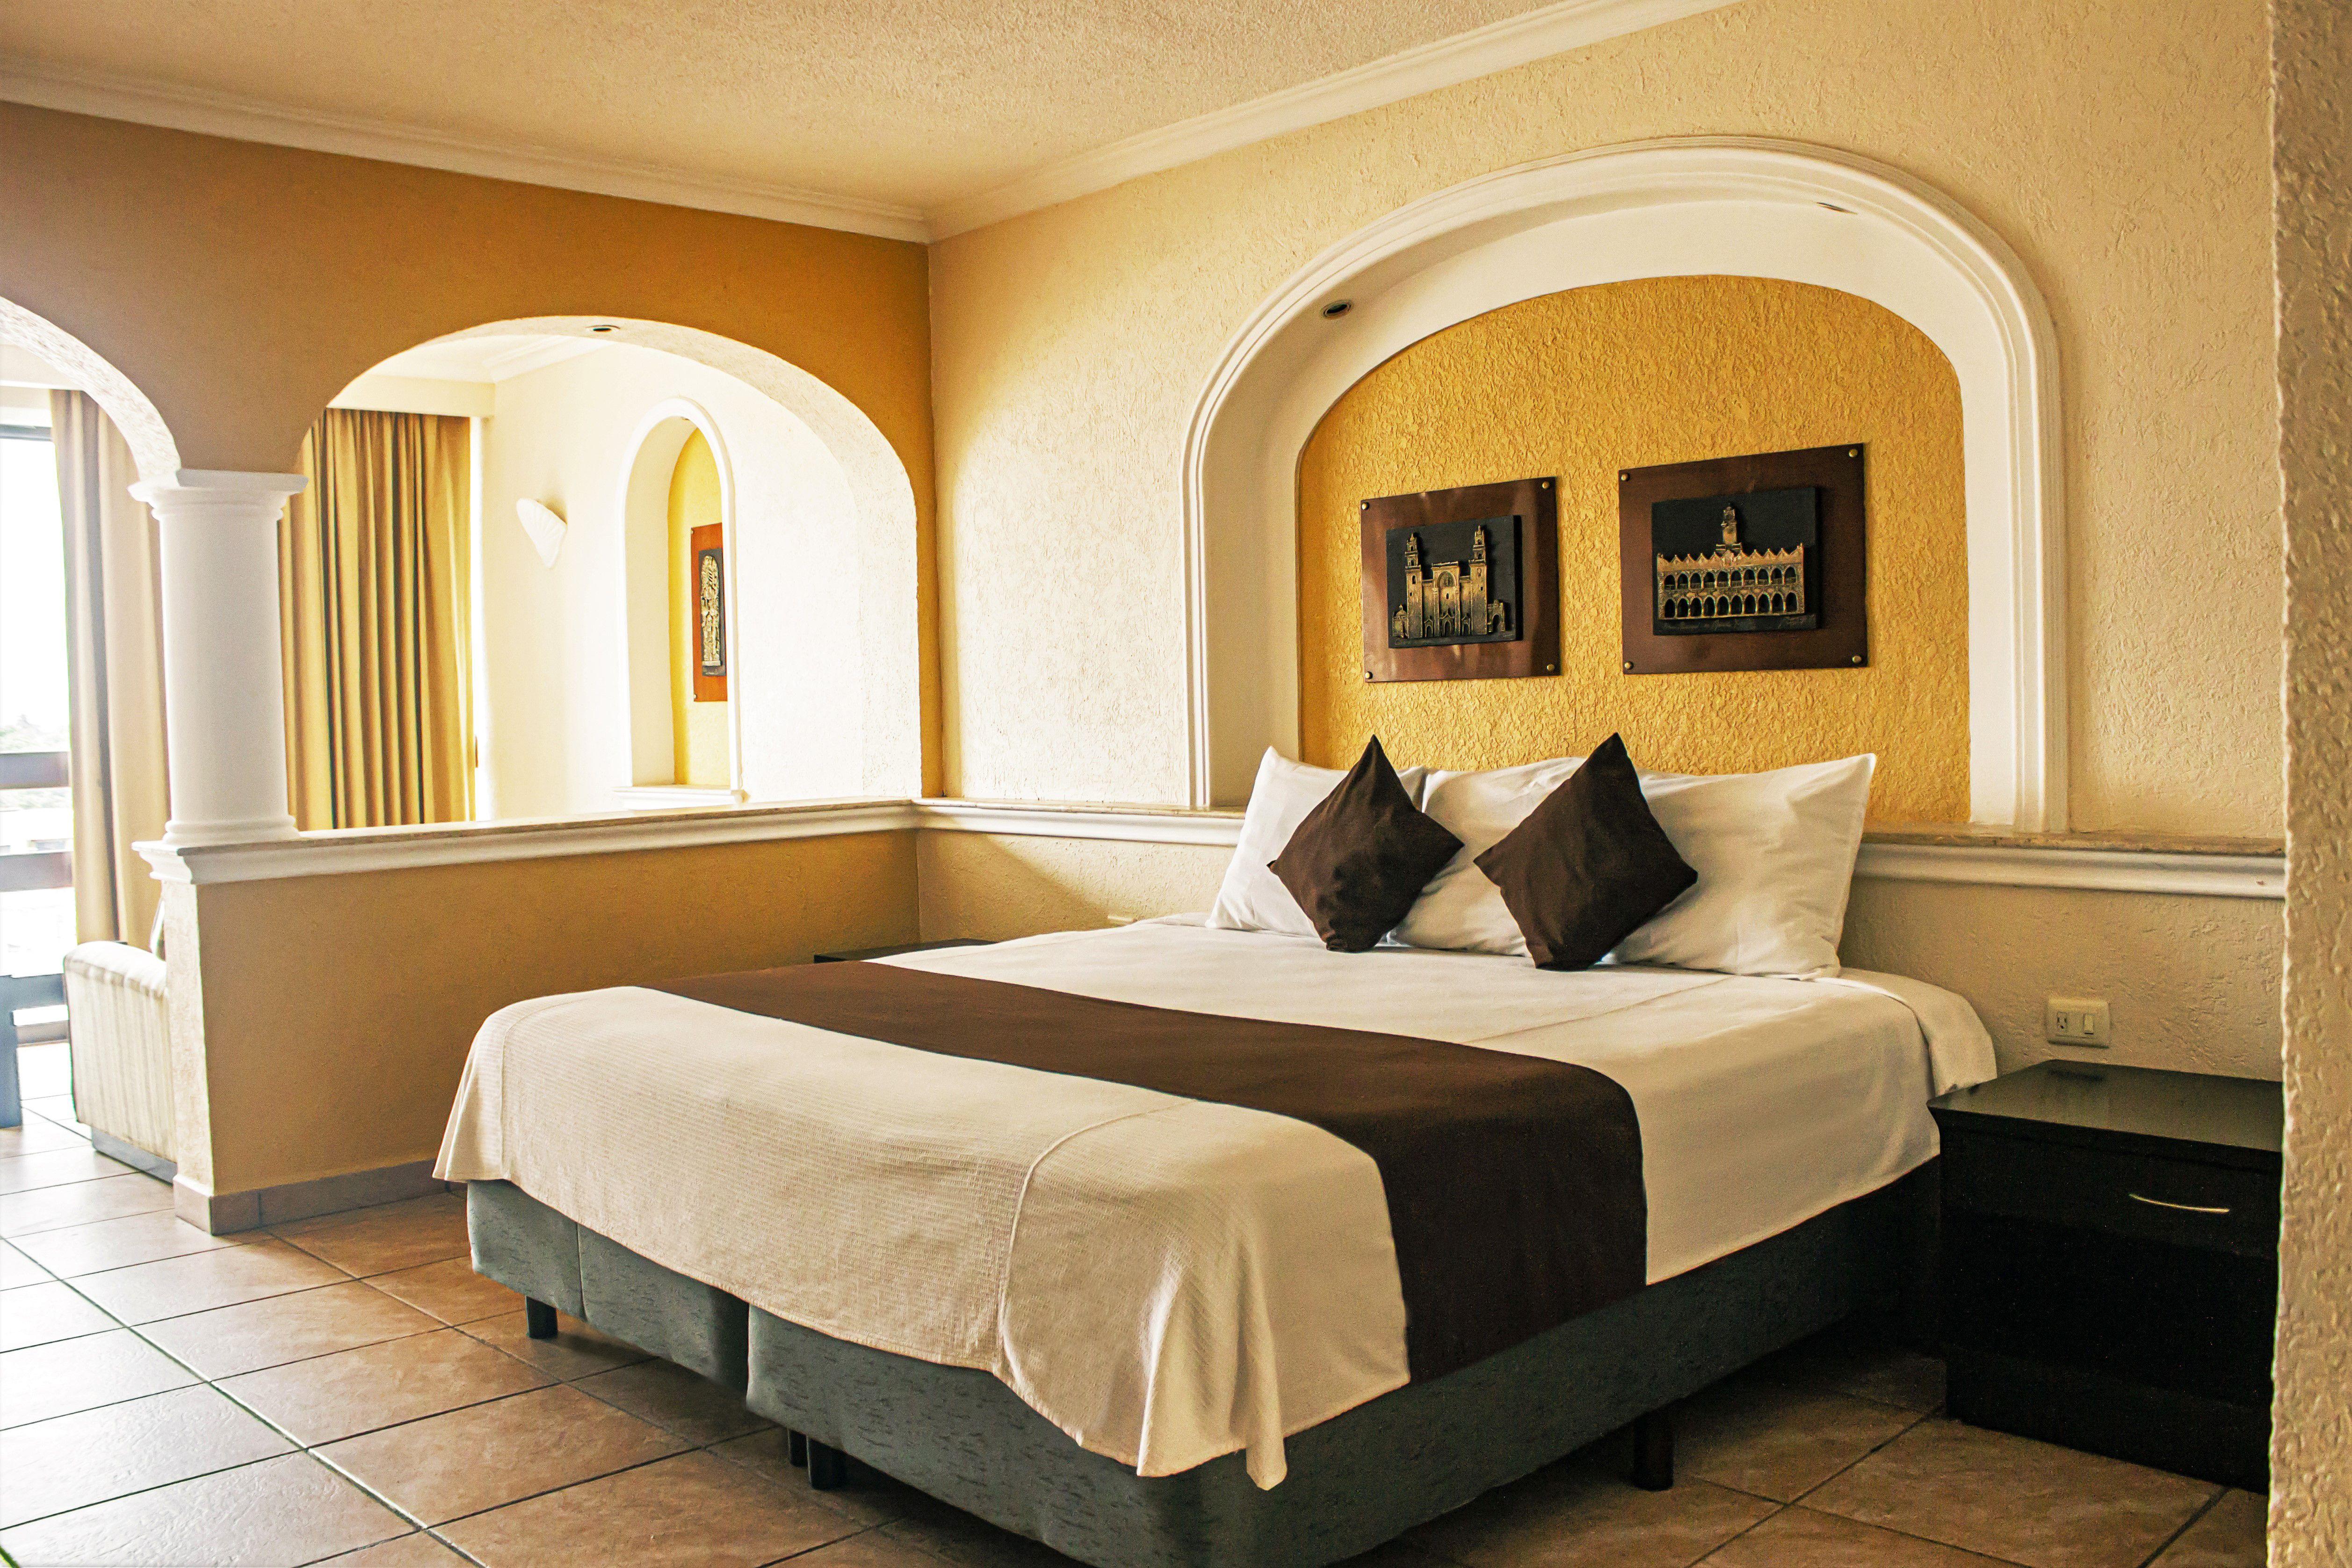 HOTEL LOS ALUXES MERIDA 4* (Mexico) - from US$ 57 | BOOKED